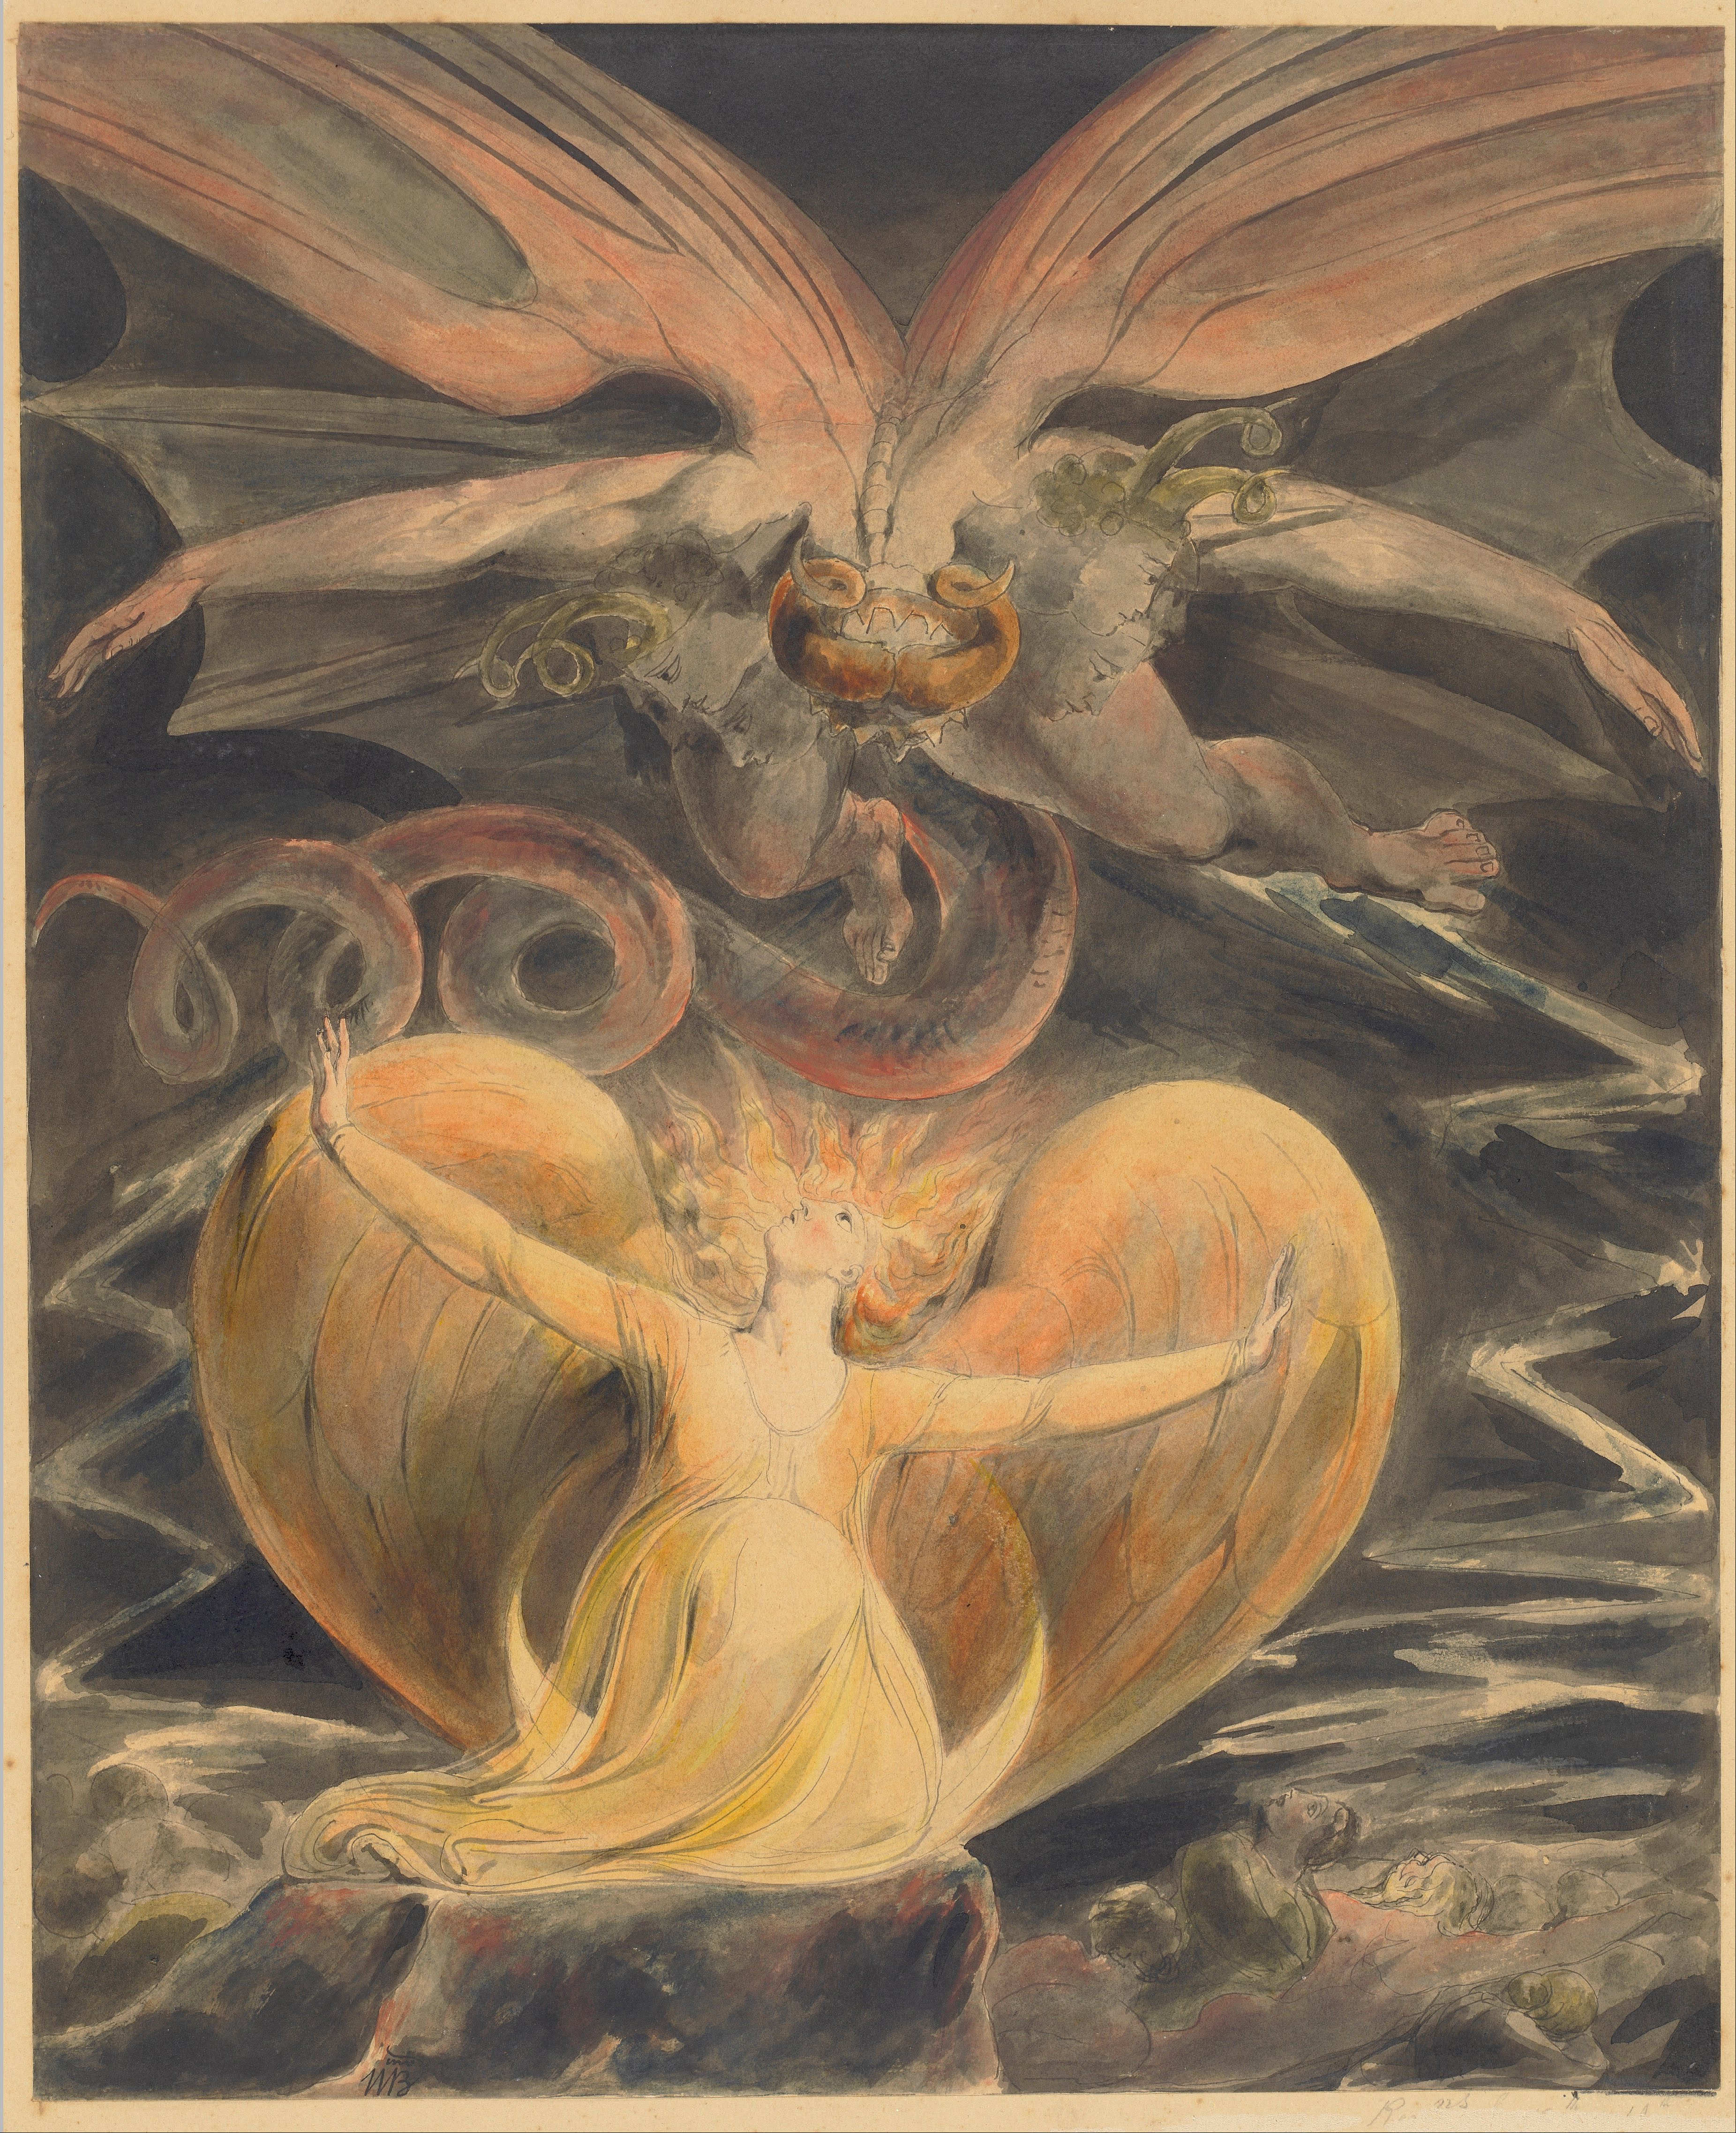 William_Blake_-_The_Great_Red_Dragon_and_the_Woman_Clothed_with_the_Sun_-_Google_Art_Project.jpg